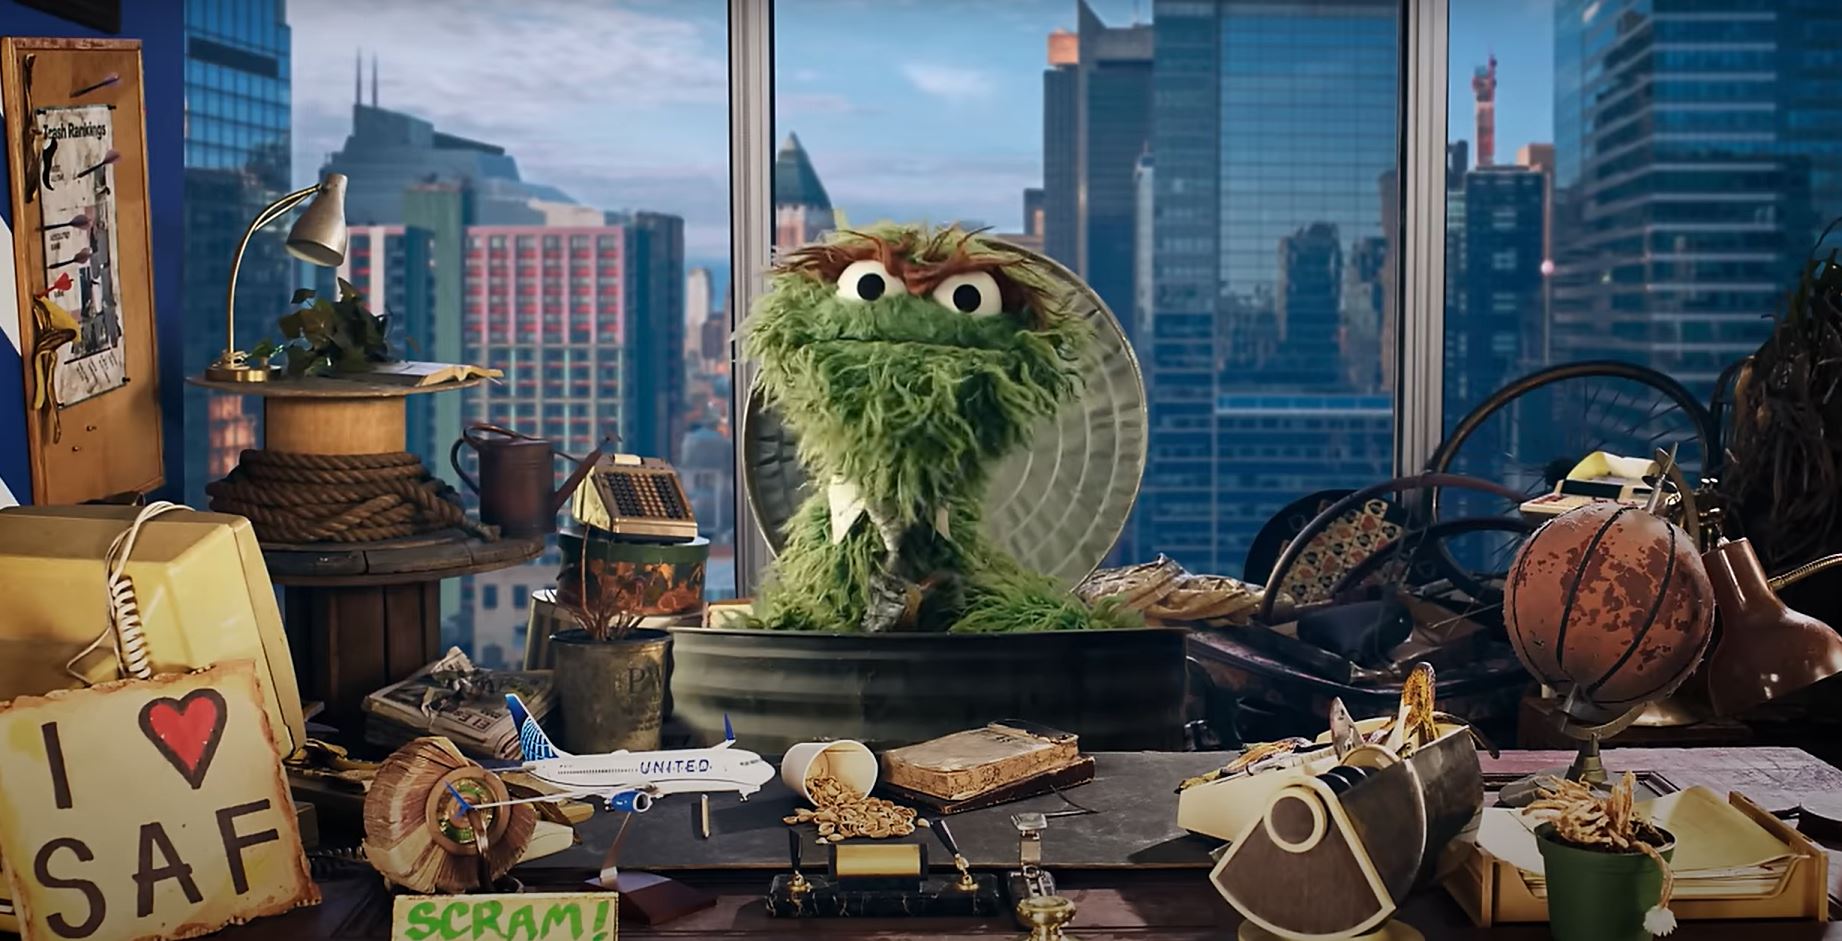 United Turns to Oscar the Grouch to Spread SAF Awareness